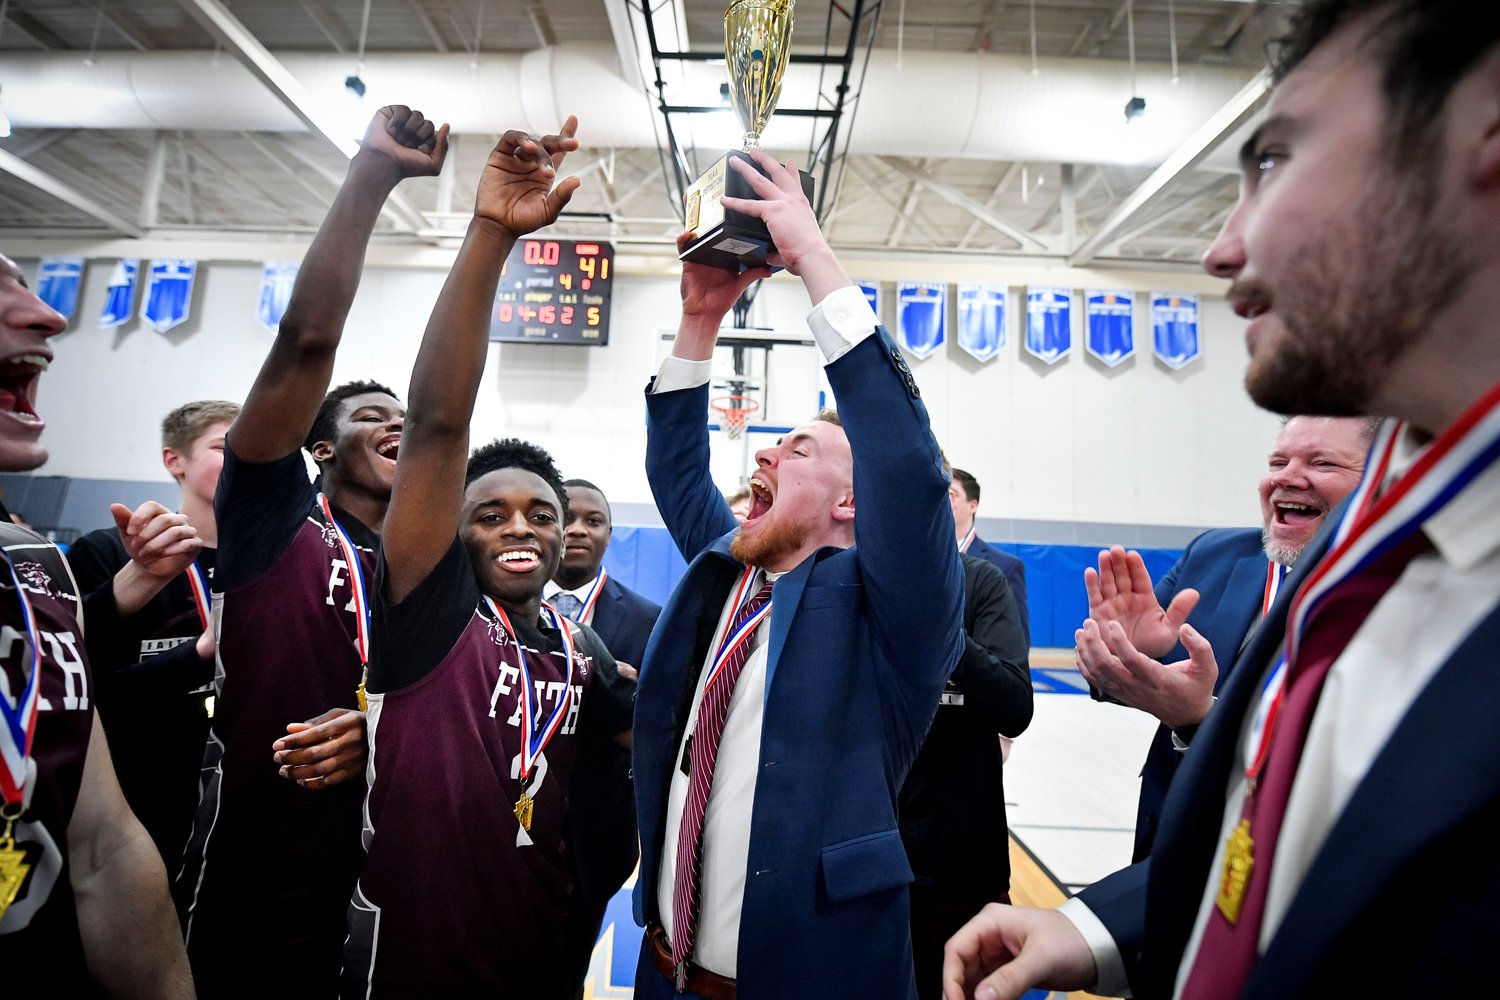 Faith Christian Academy boys basketball head coach Seth Brunner hoists the District One Class A trophy after the Lions defeated Plumstead Christian 41-34 in Saturday’s final at Bensalem High School. It was the second district championship of the day for Faith, whose girls basketball team captured its first district title earlier in the afternoon.